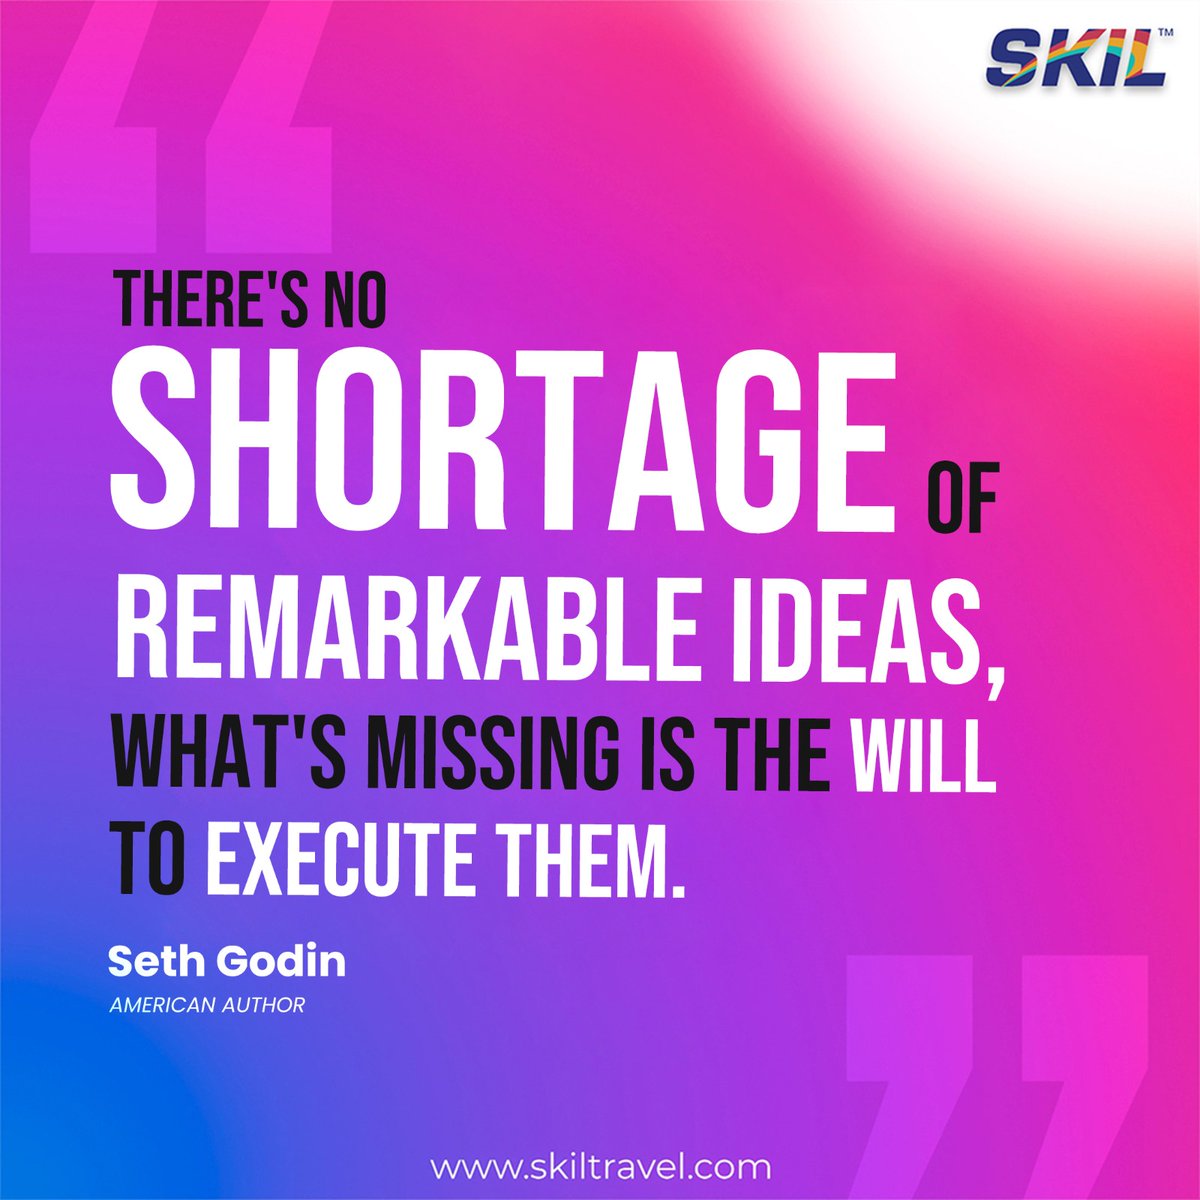 Don't let your incredible ideas gather dust! Take that first step, embrace the challenges, and watch your vision come to life. 🚀 Remember, the world needs your unique spark - so what are you waiting for? ✨ #SKIL #SKILTravel #motivation #SuccessTips #Inspiration